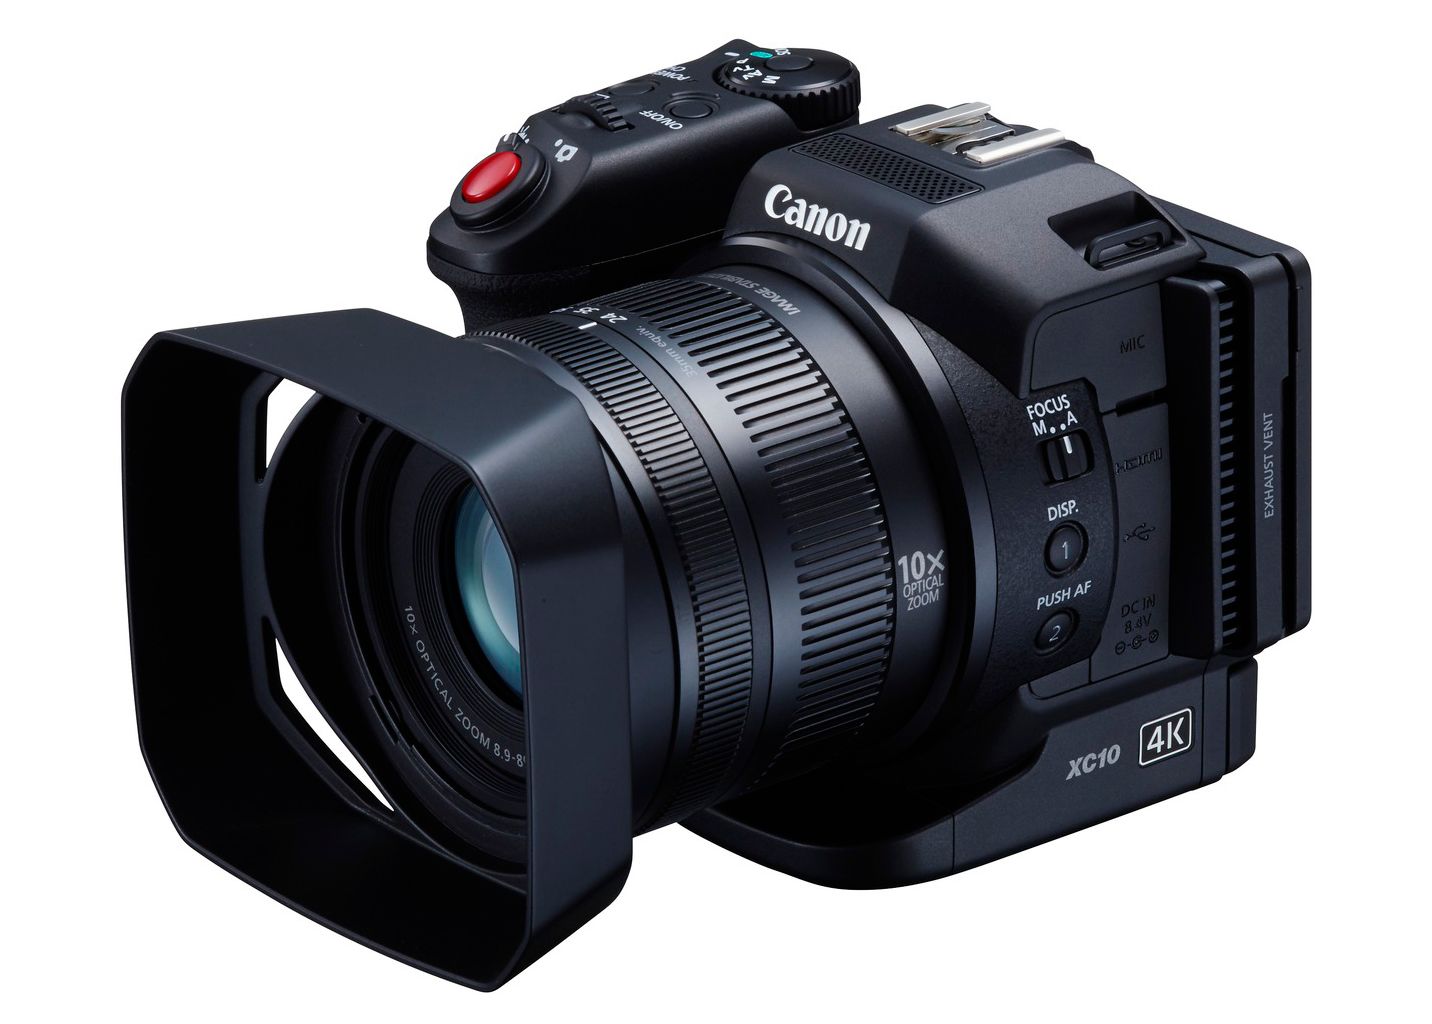 canon goes 4k crazy with xc10 and eos c300 mk ii video cameras and a reference monitor to boot image 1